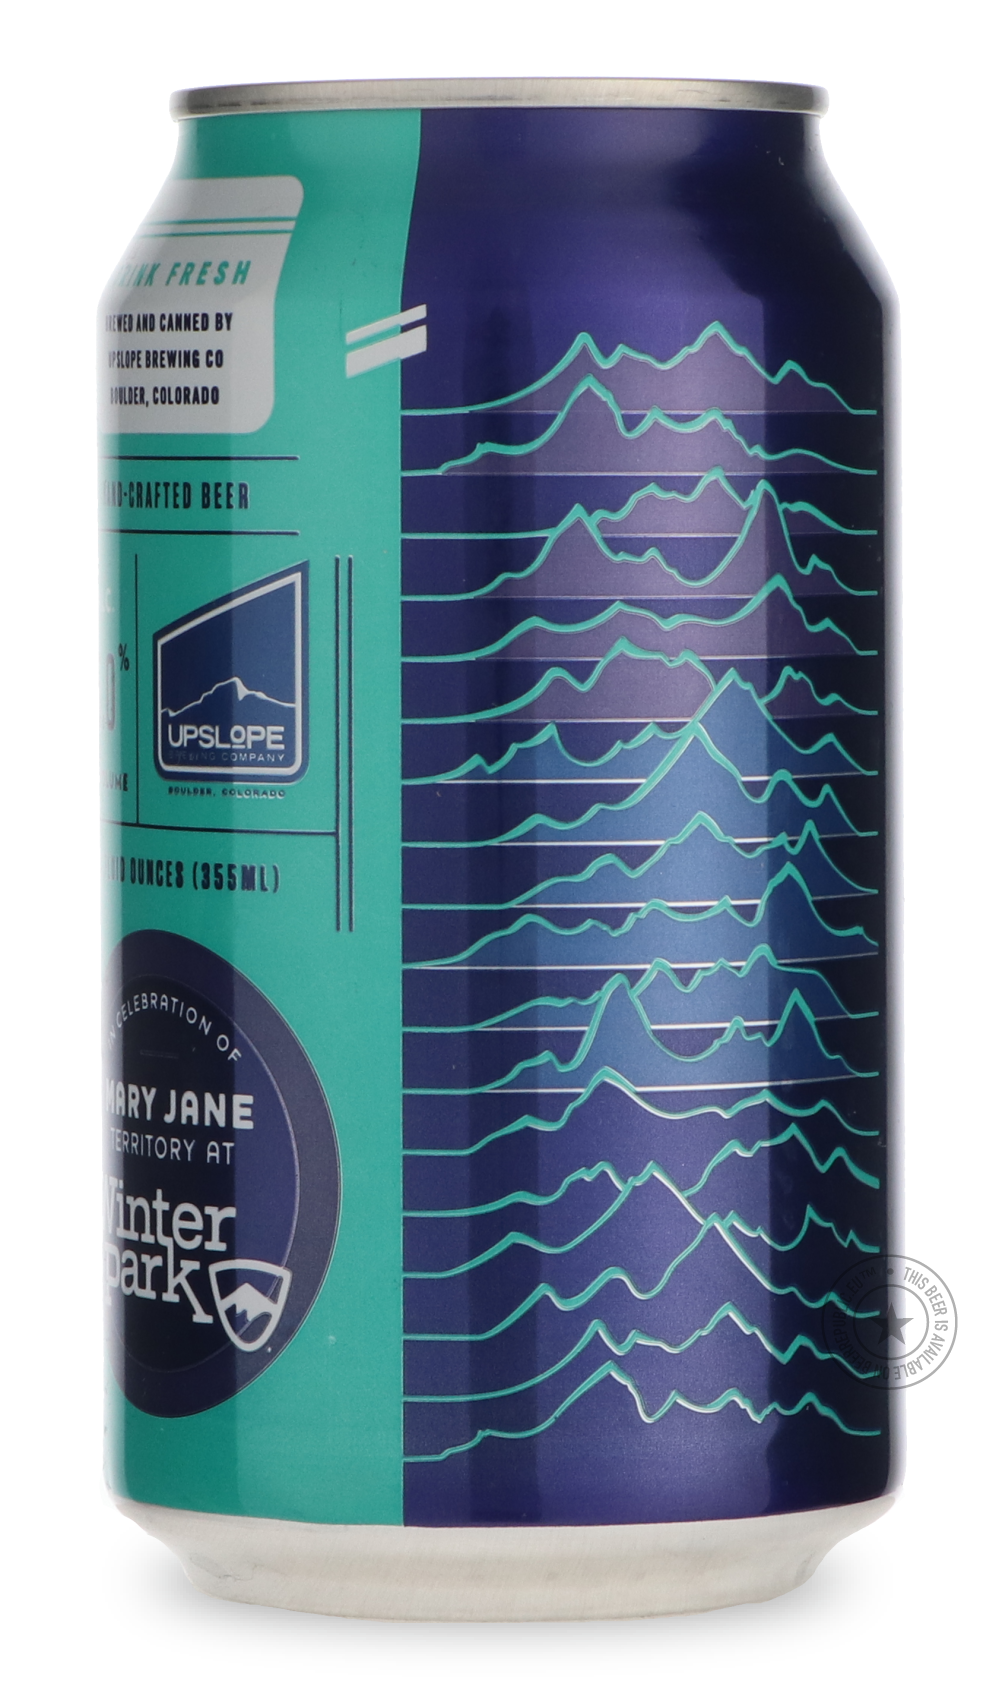 -Upslope- Mary Jane Ale-Pale- Only @ Beer Republic - The best online beer store for American & Canadian craft beer - Buy beer online from the USA and Canada - Bier online kopen - Amerikaans bier kopen - Craft beer store - Craft beer kopen - Amerikanisch bier kaufen - Bier online kaufen - Acheter biere online - IPA - Stout - Porter - New England IPA - Hazy IPA - Imperial Stout - Barrel Aged - Barrel Aged Imperial Stout - Brown - Dark beer - Blond - Blonde - Pilsner - Lager - Wheat - Weizen - Amber - Barley W